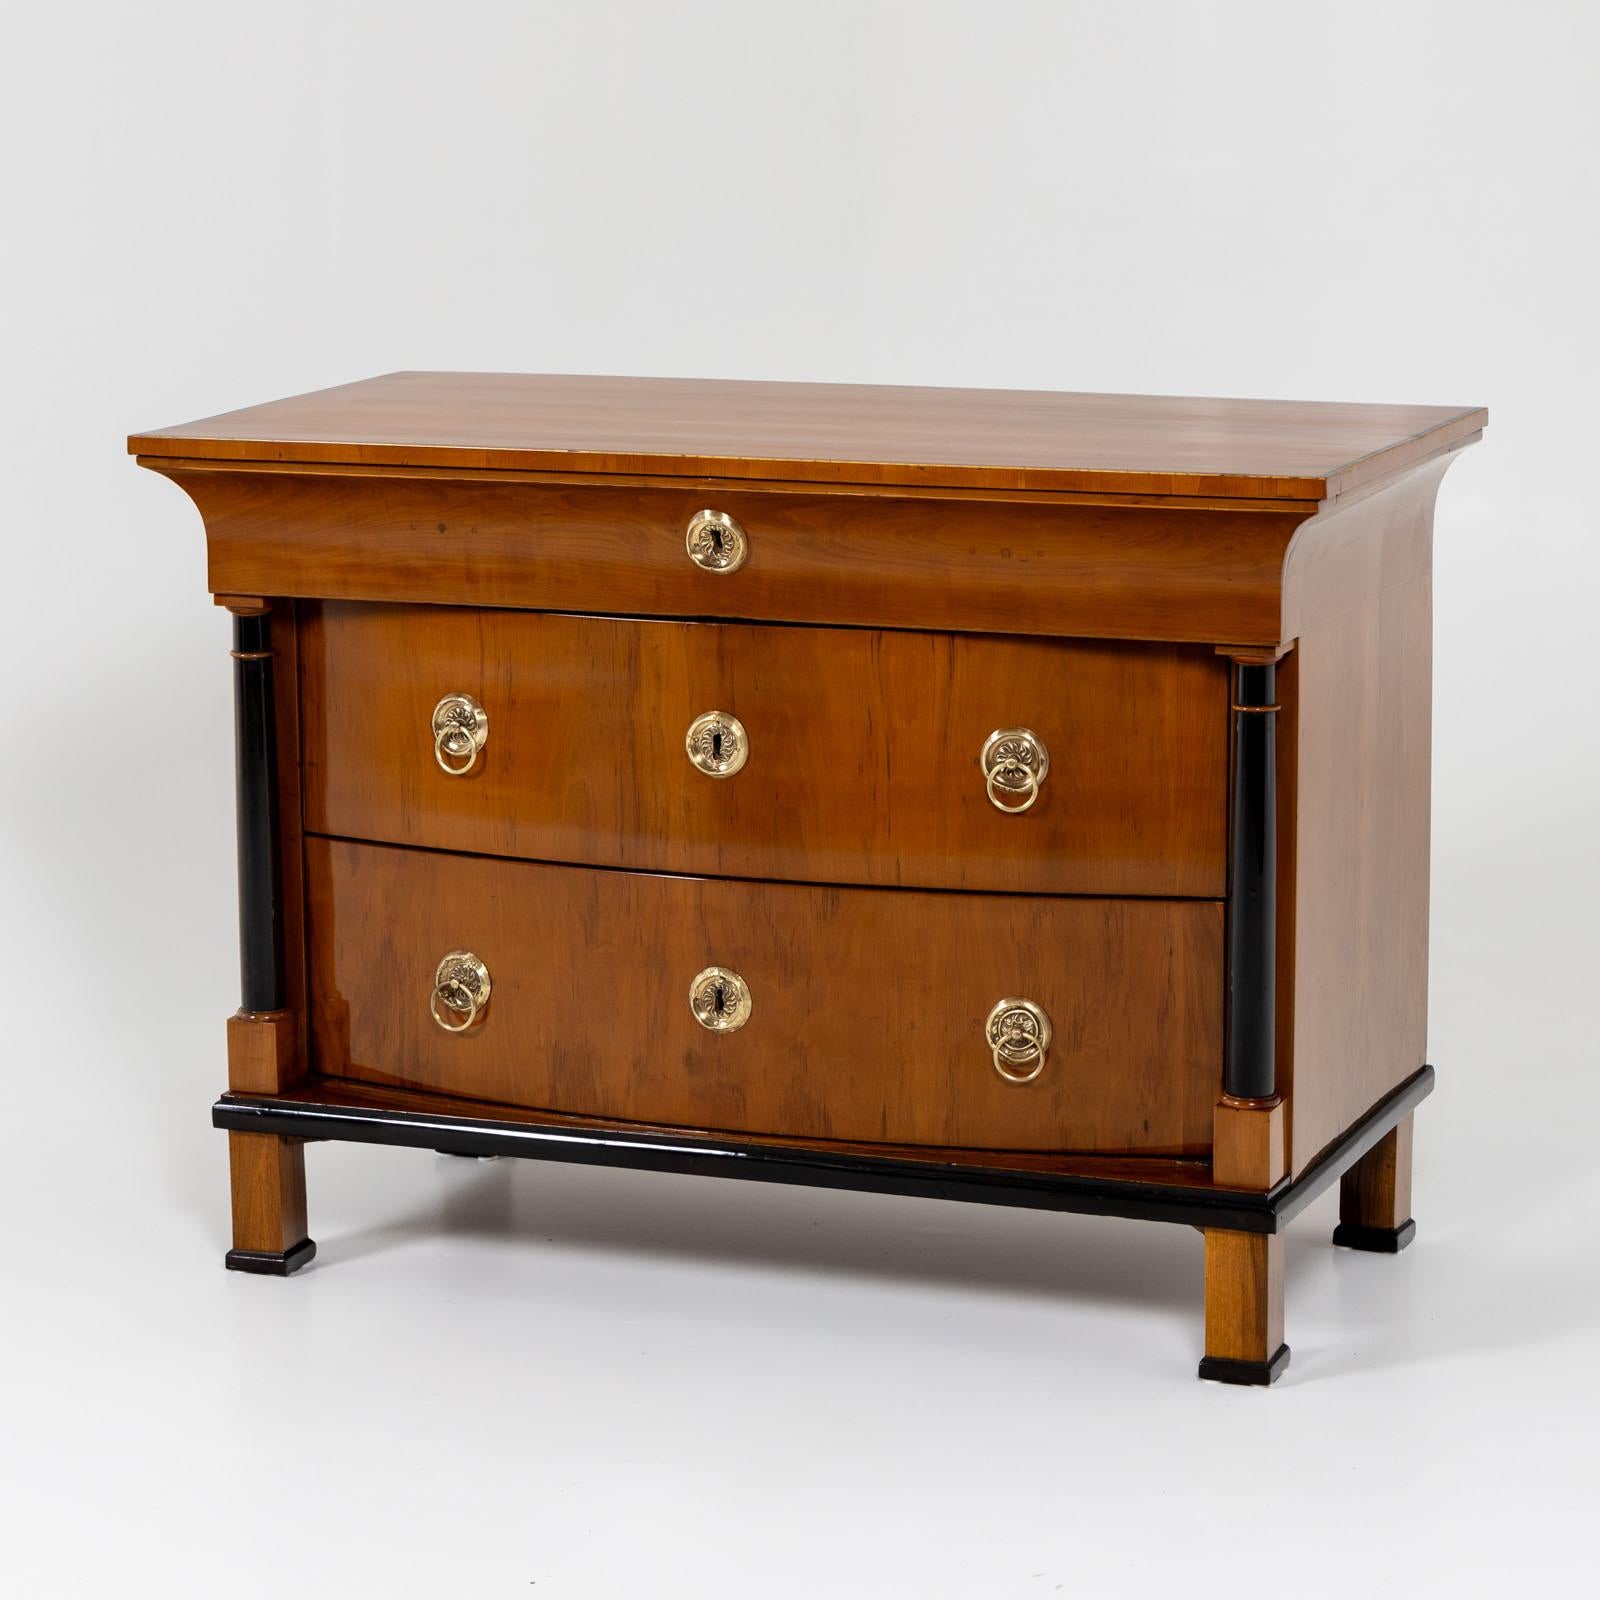 Biedermeier chest of drawers with cambered front and three drawers. The two lower drawers are flanked by ebonized columns. The chest of drawers stands on square feet and is veneered in pear wood. Disc-shaped brass fittings adorn the front. The head